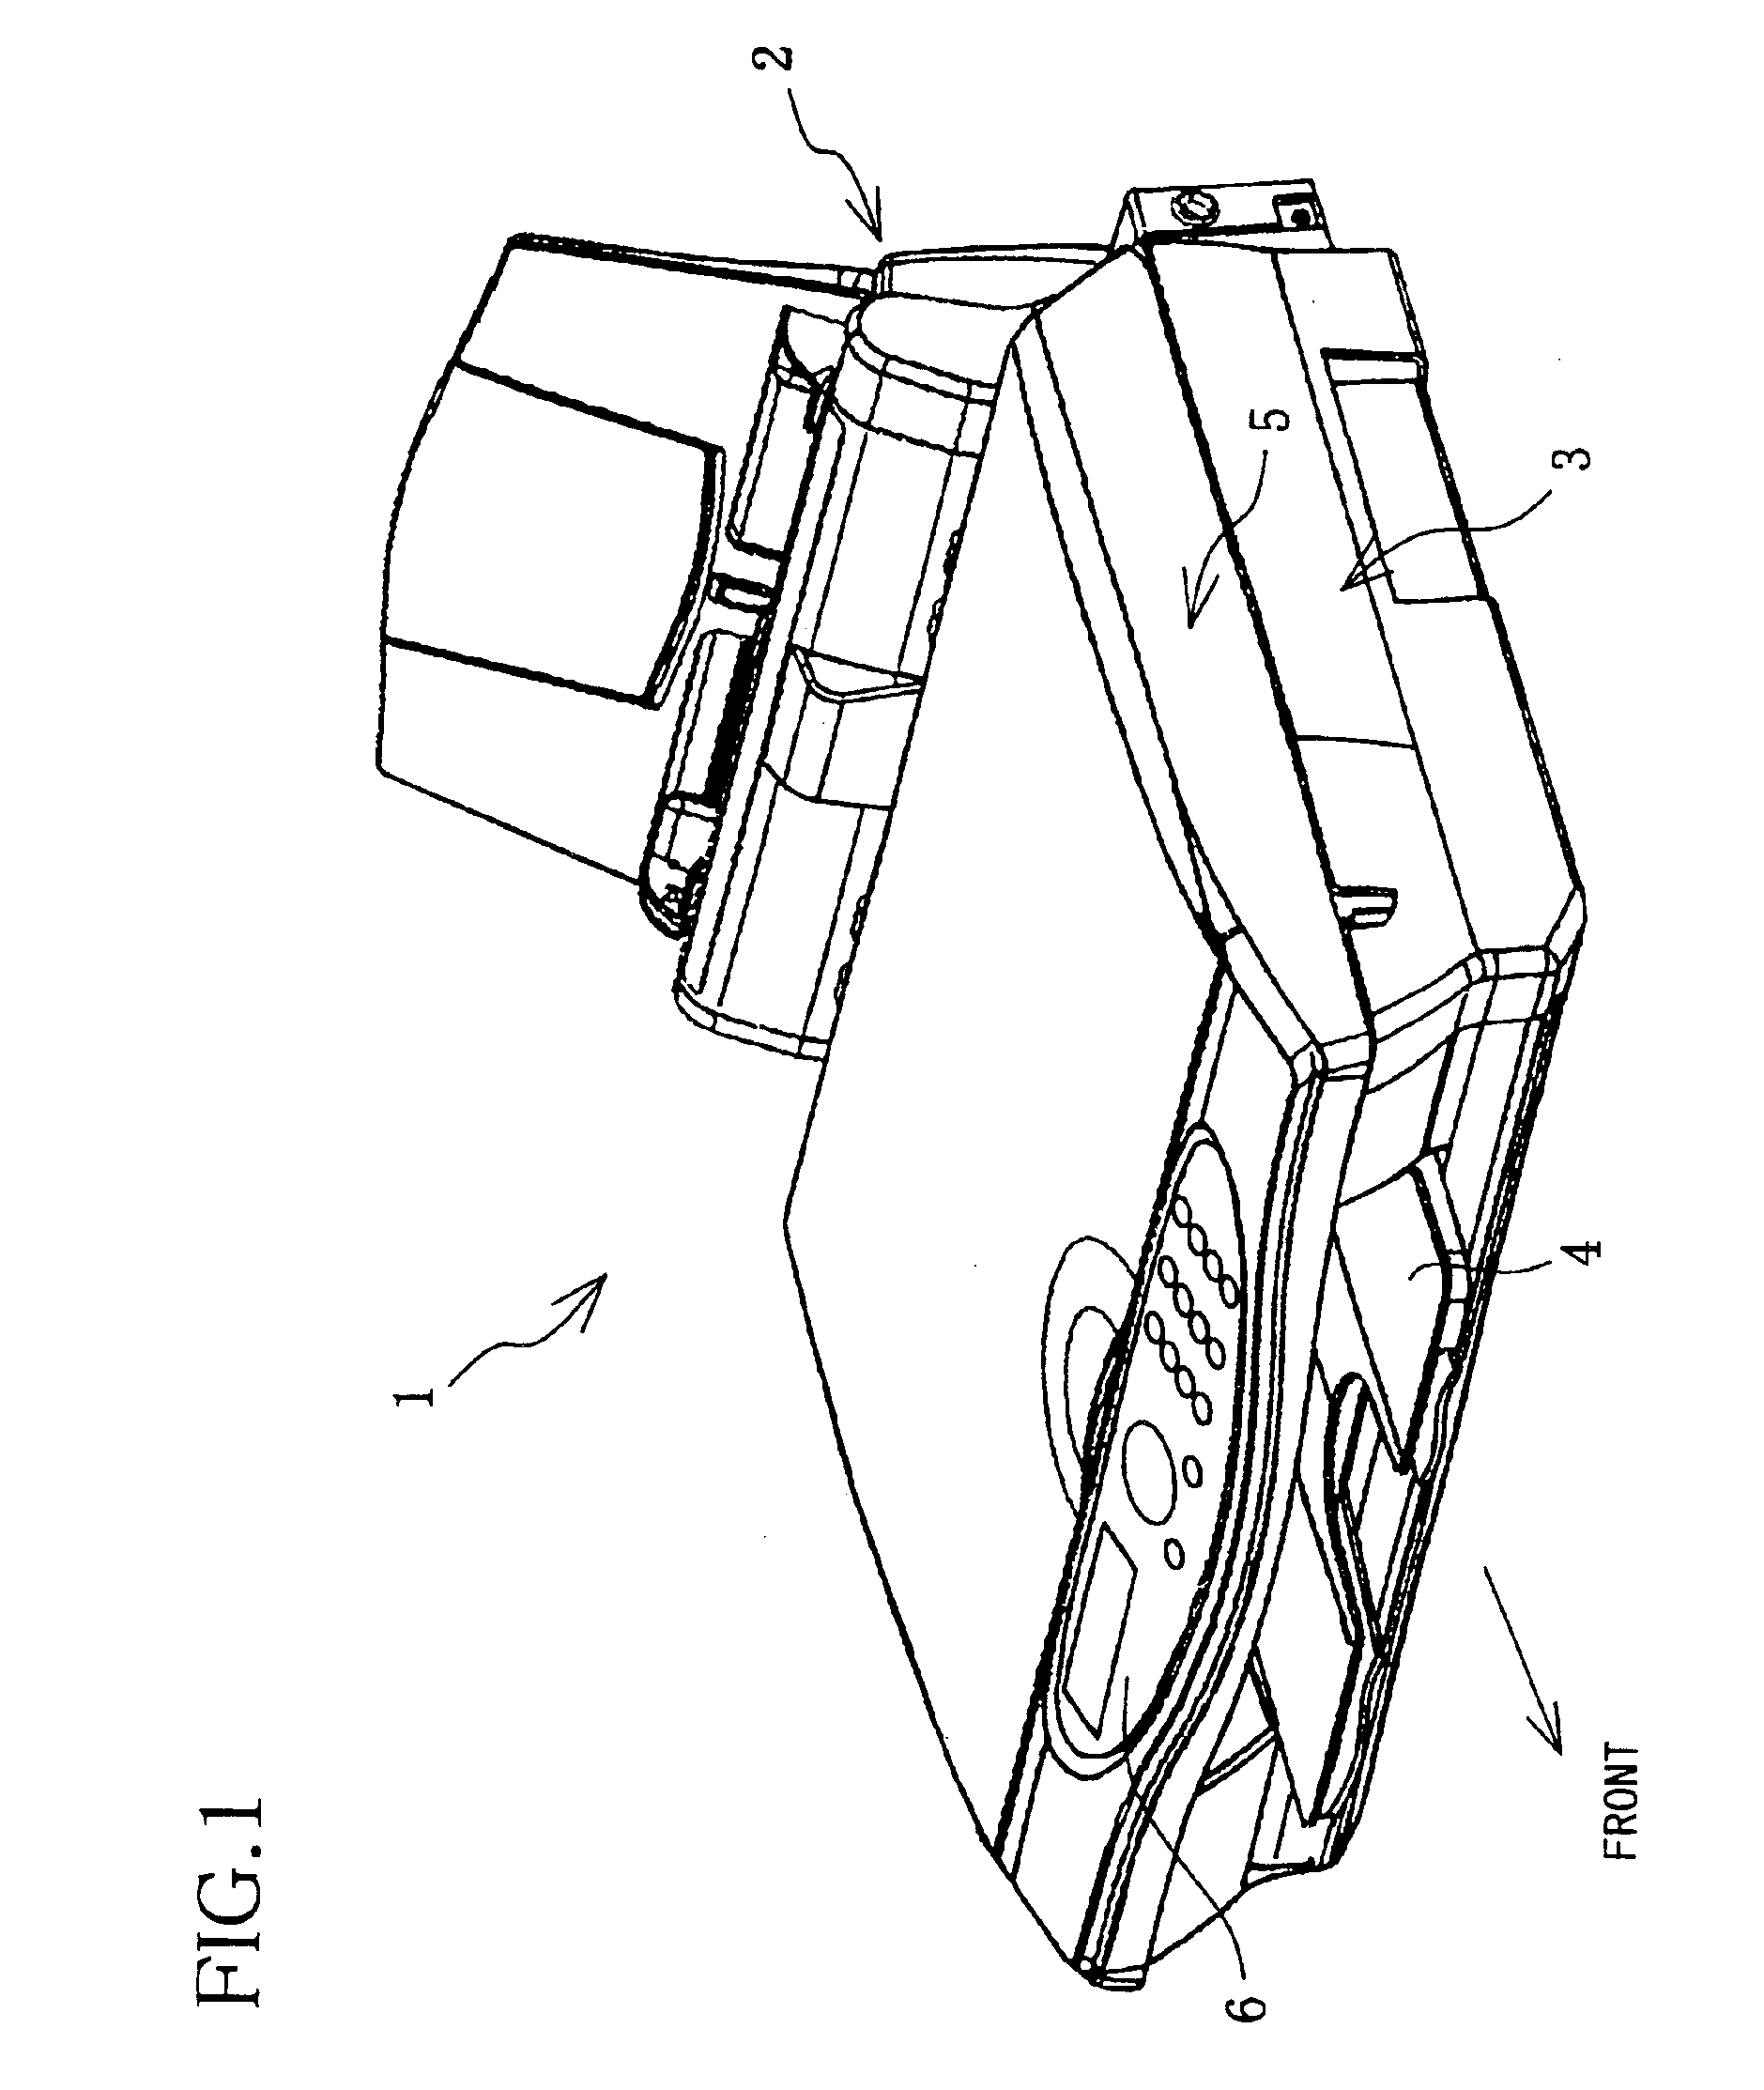 Printer with reinforcing cover and ink tube fixing portions